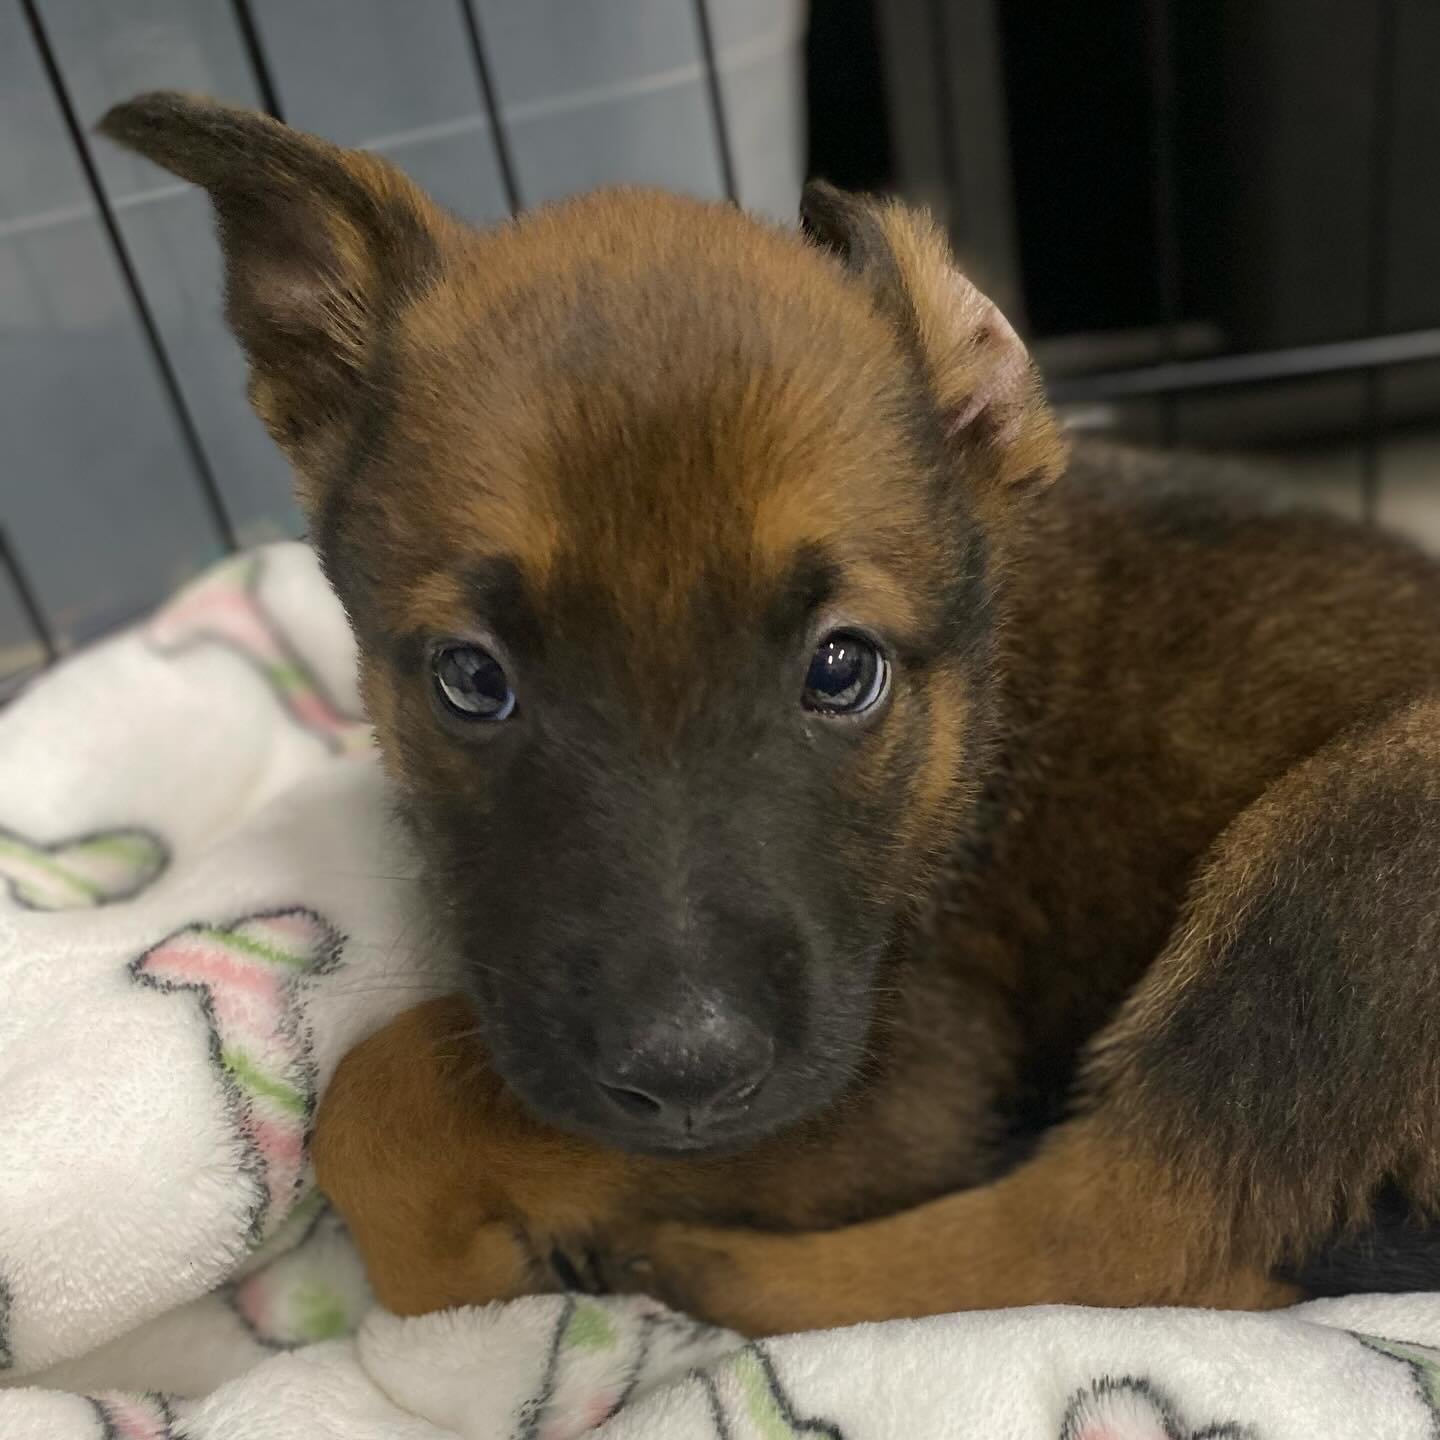 CUTENESS OVERLOAD!!!!!!!!!!!!!! We received an urgent message from someone about a litter of puppies in a bad situation that were less than a month old. We had just finished getting our last batch of German Shepherd puppies adopted and I said no pupp